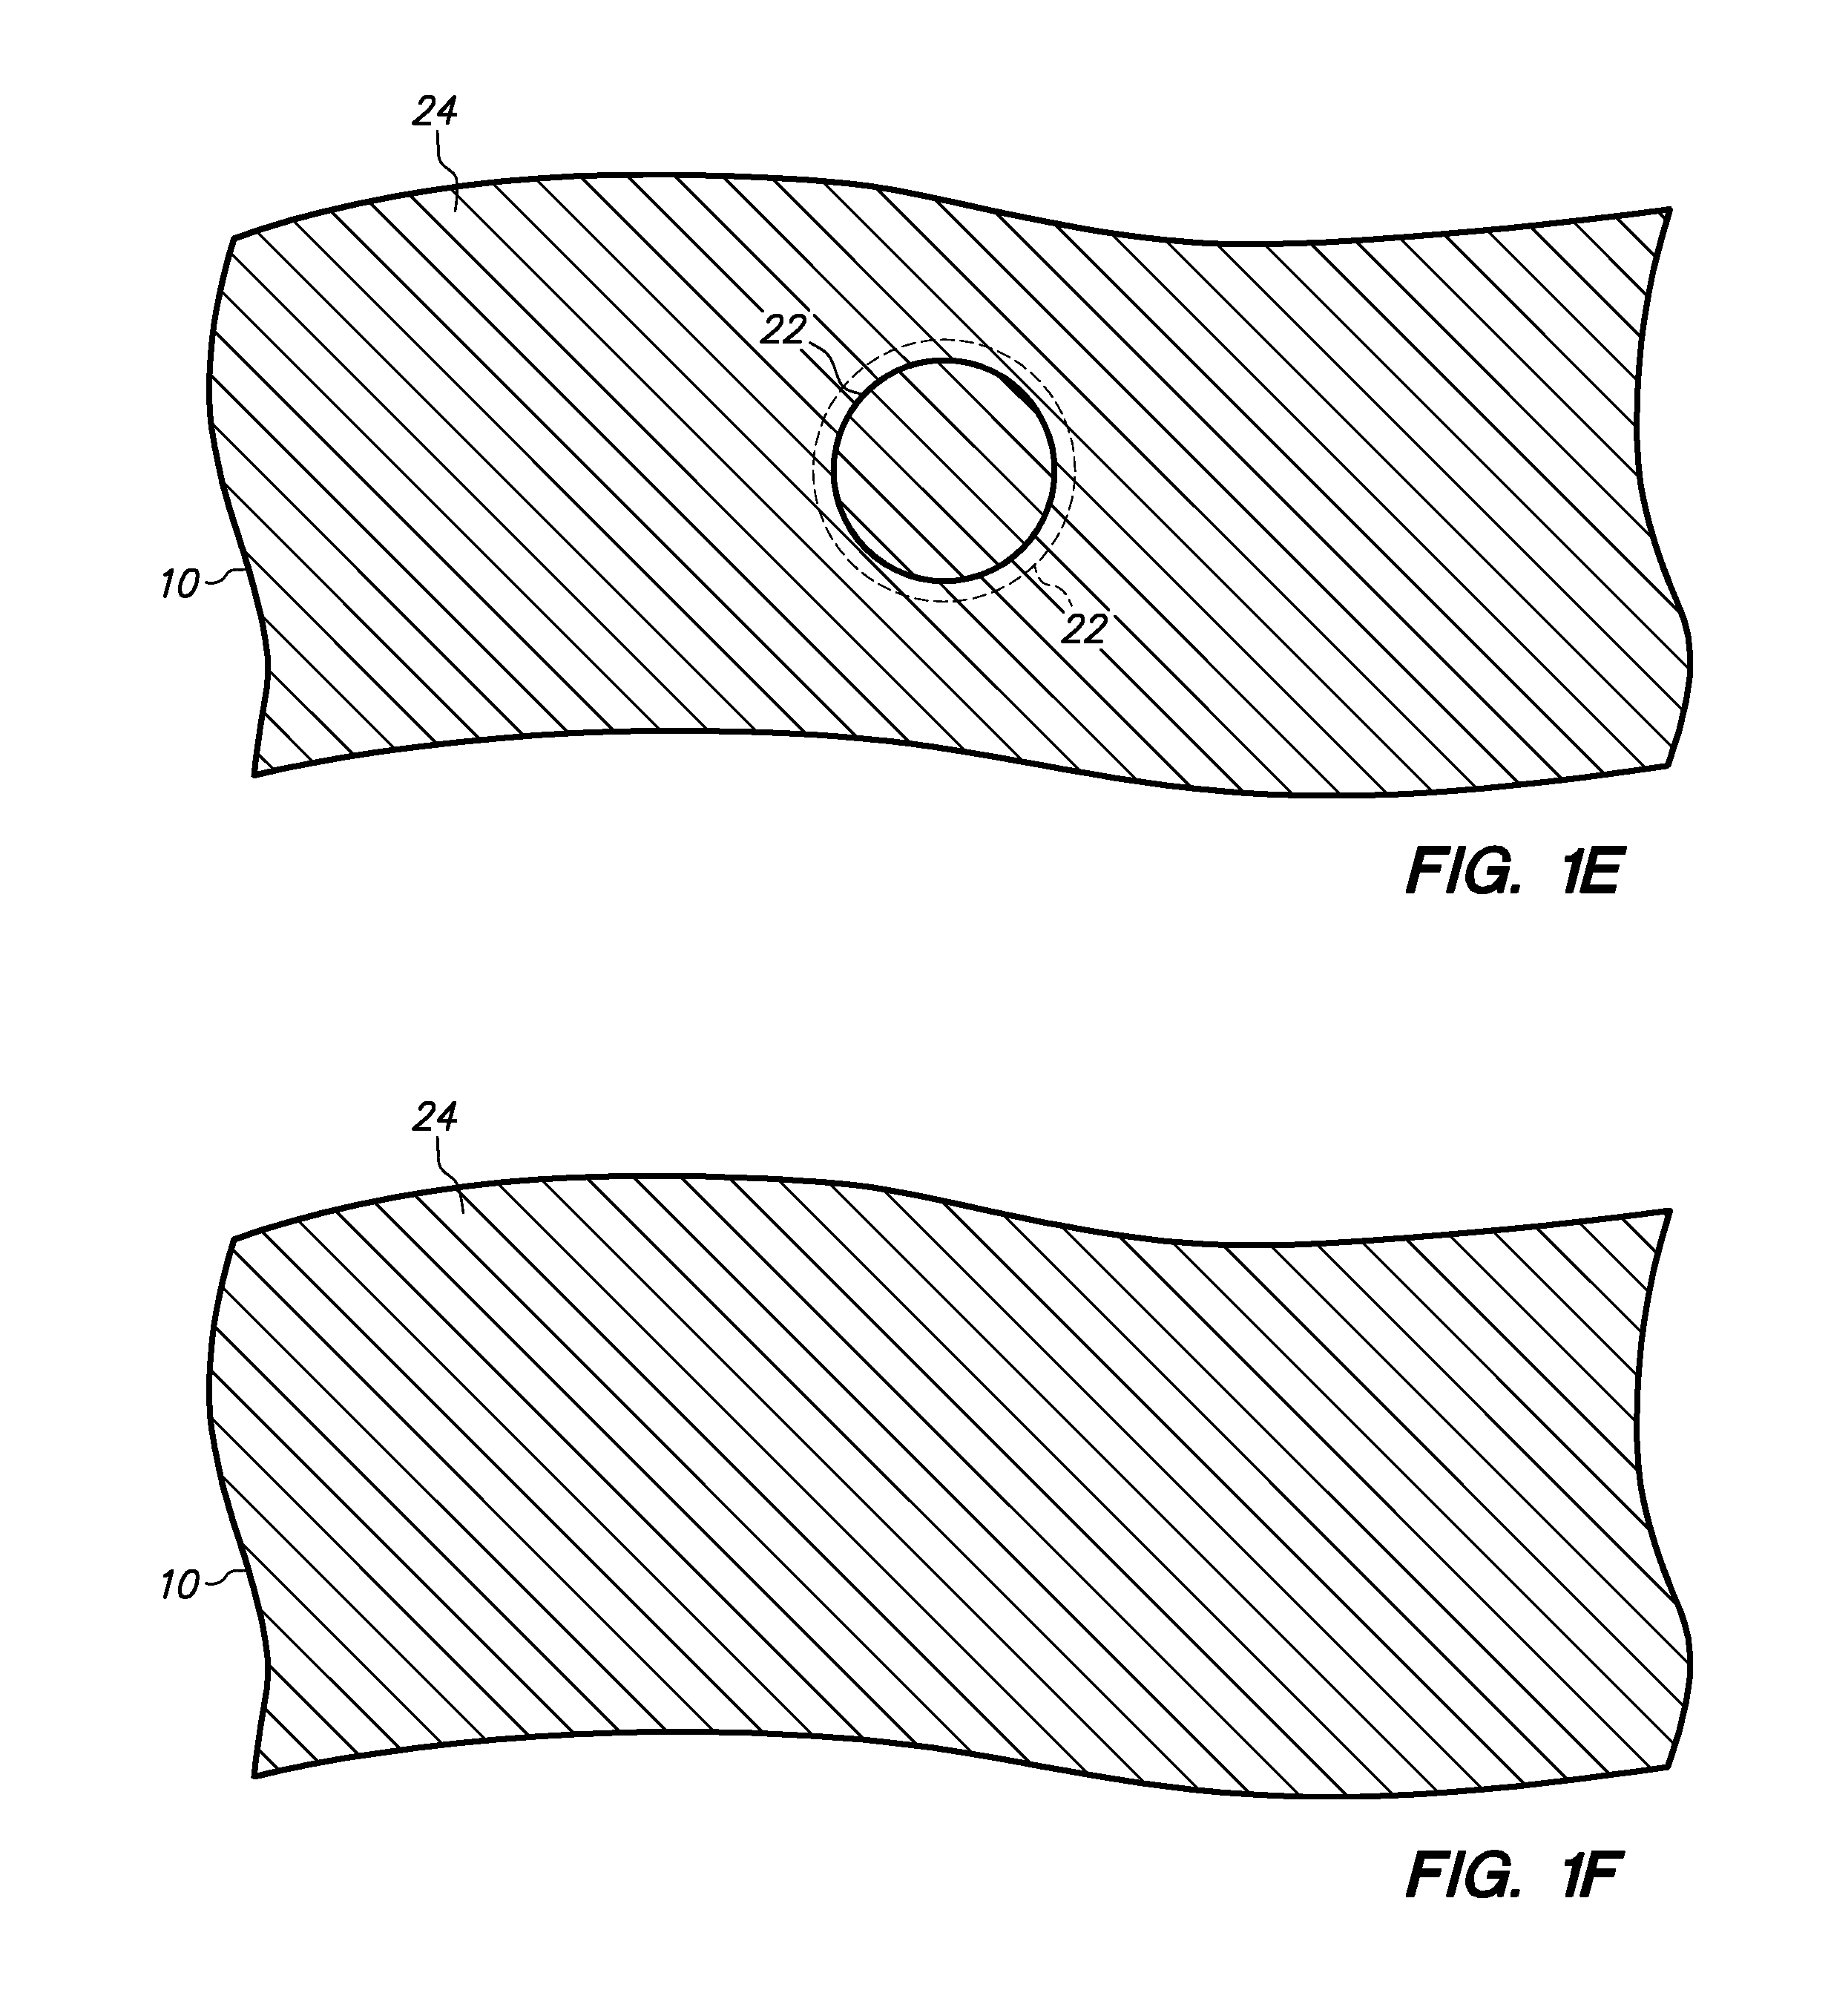 Method of making a semiconductor chip assembly with a post/base heat spreader and a mulitlevel conductive trace